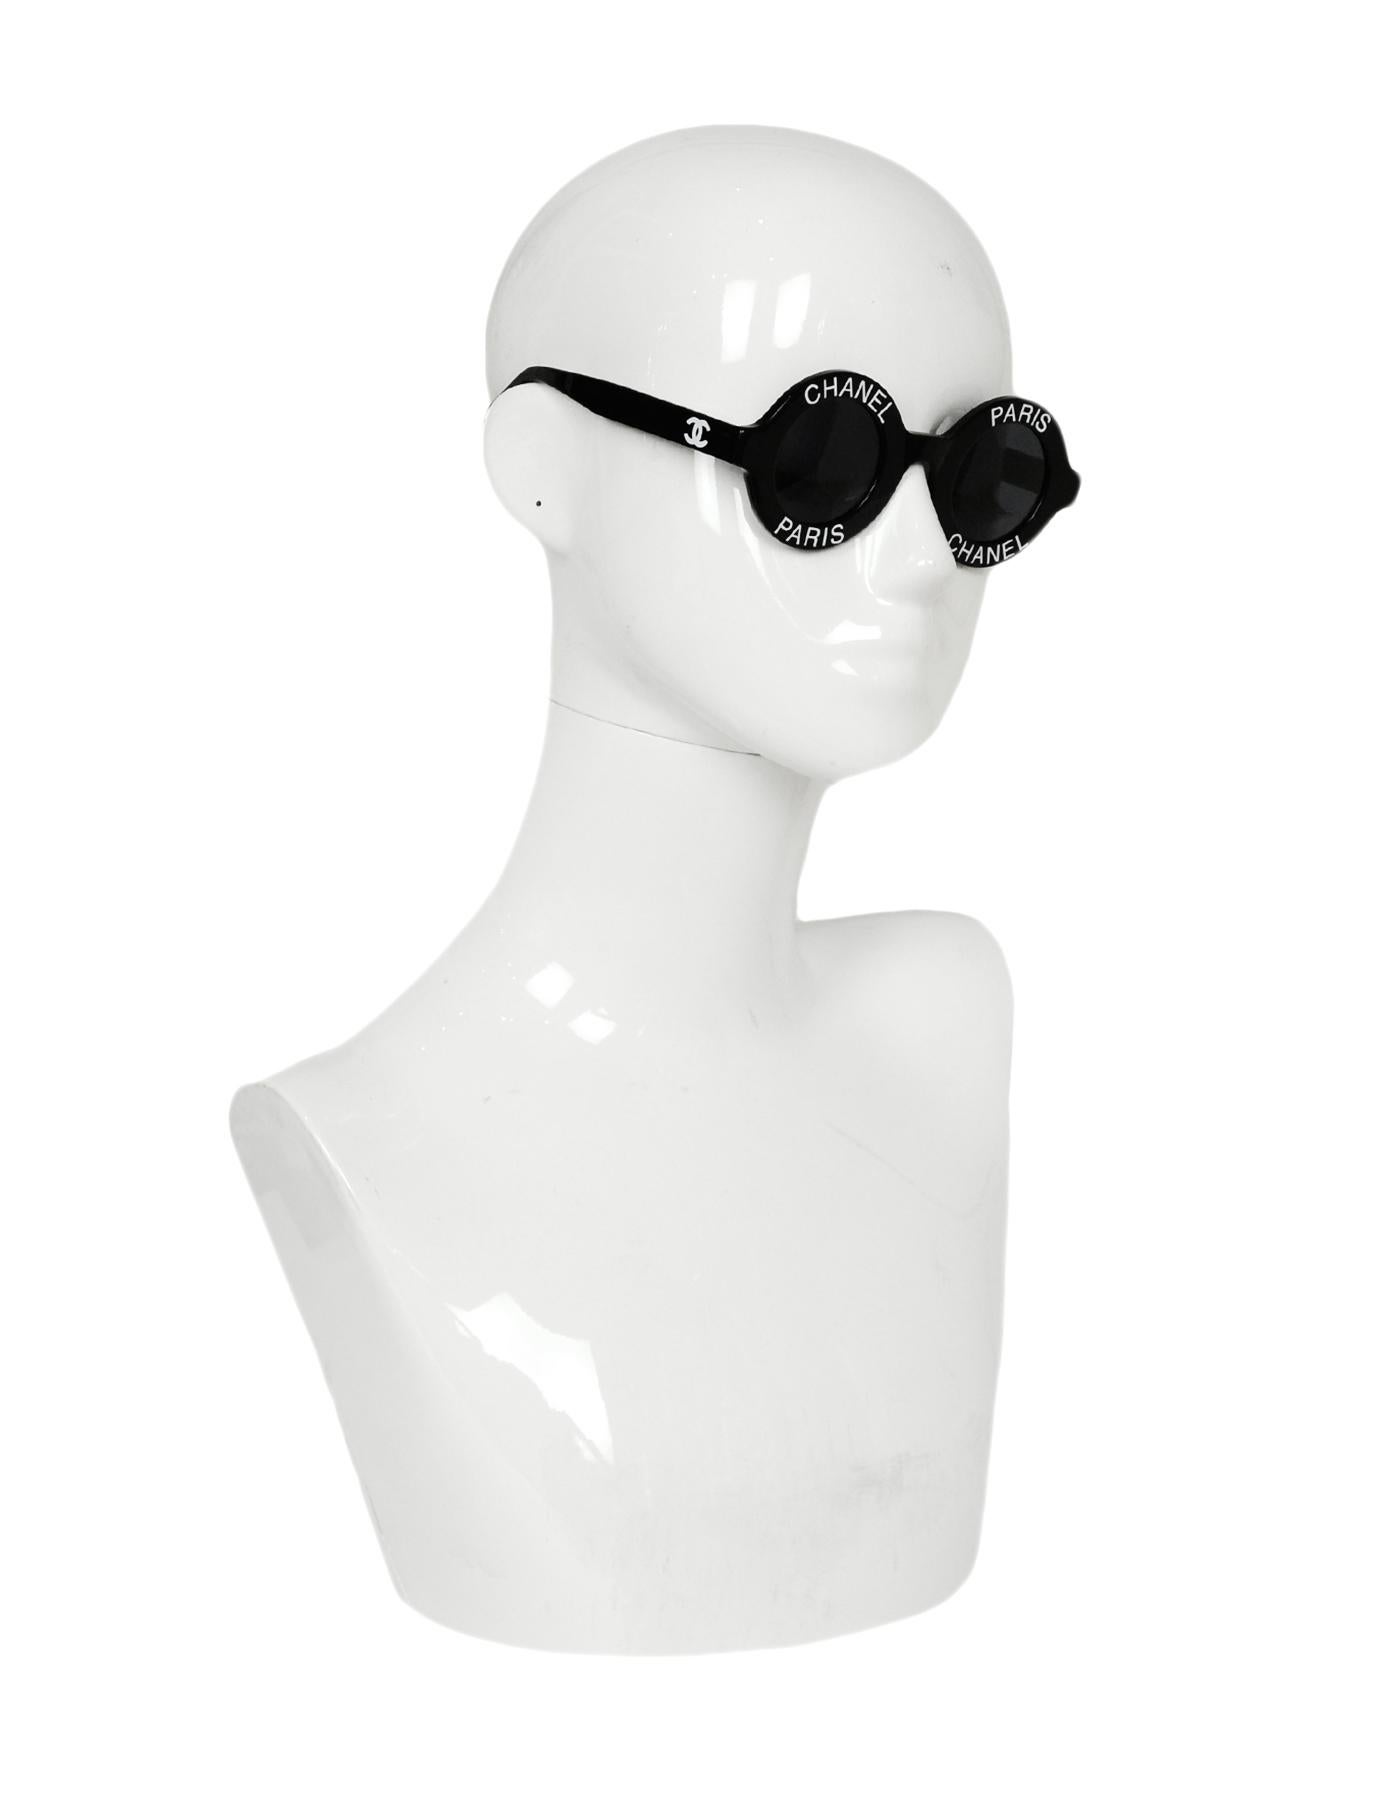 Chanel Black Resin Round Frame Sunglasses w/ Chanel Paris

Made In: Italy
Year of Production: 1993
Color: Black with white lettering
Hardware: Goldtone
Materials: Resin
Overall Condition: Excellent pre-owned condition with the exception of light